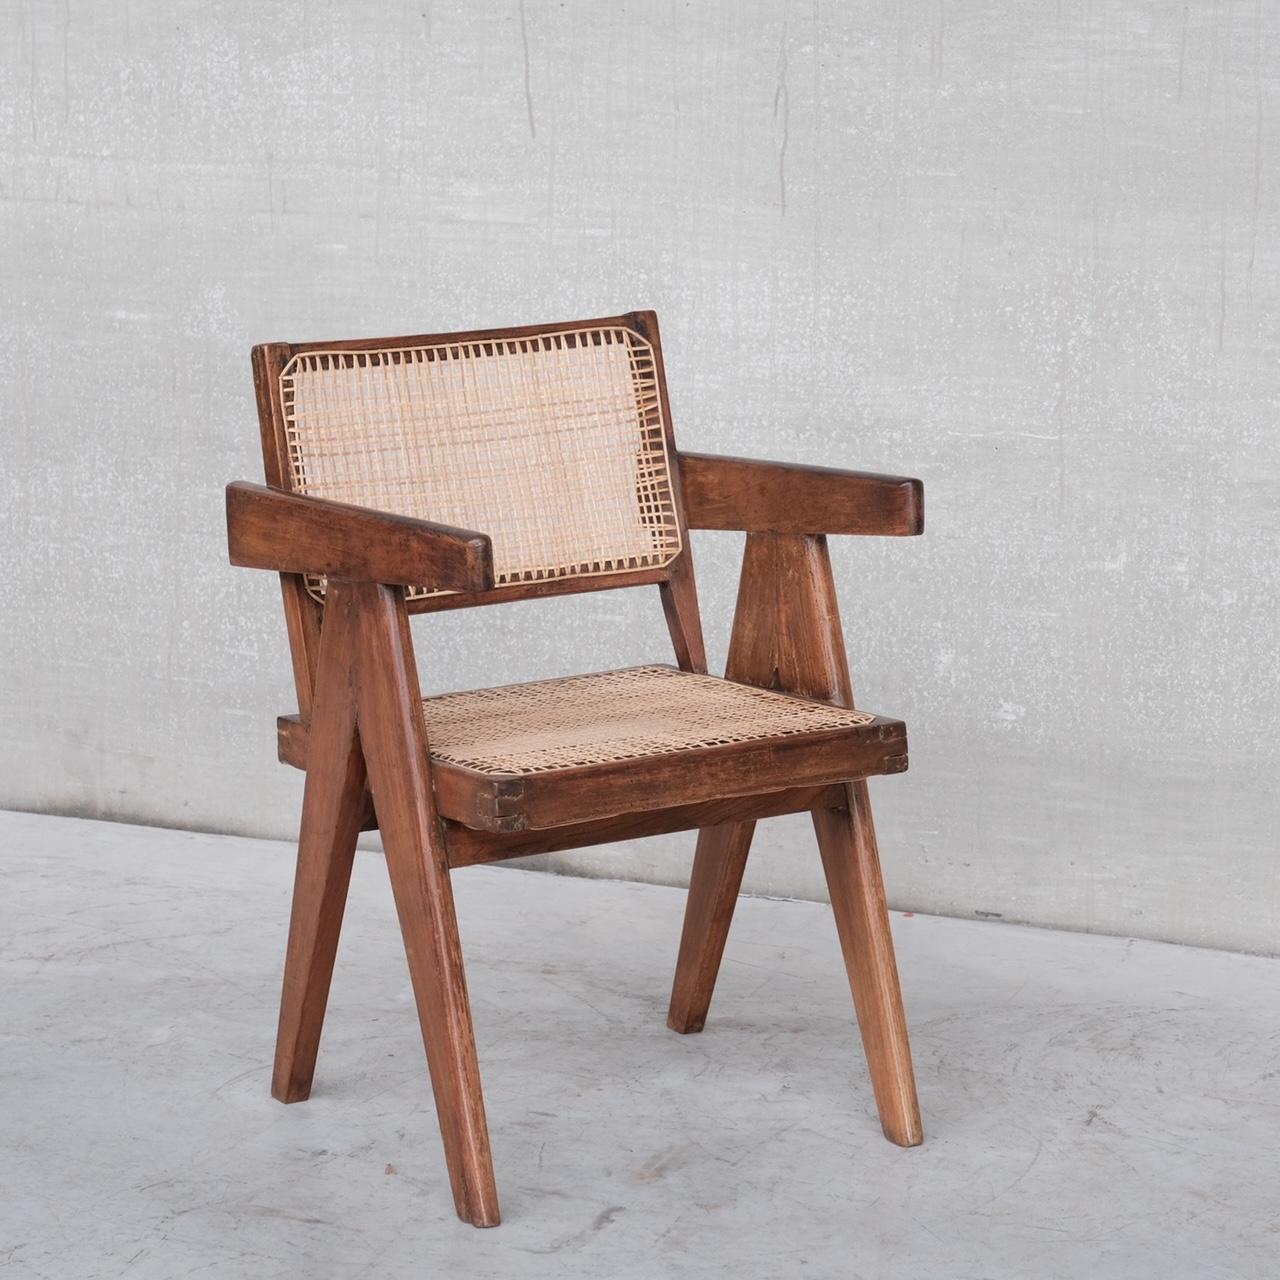 Pierre Jeanneret Original Cane and Teak Office Chair In Good Condition For Sale In London, GB